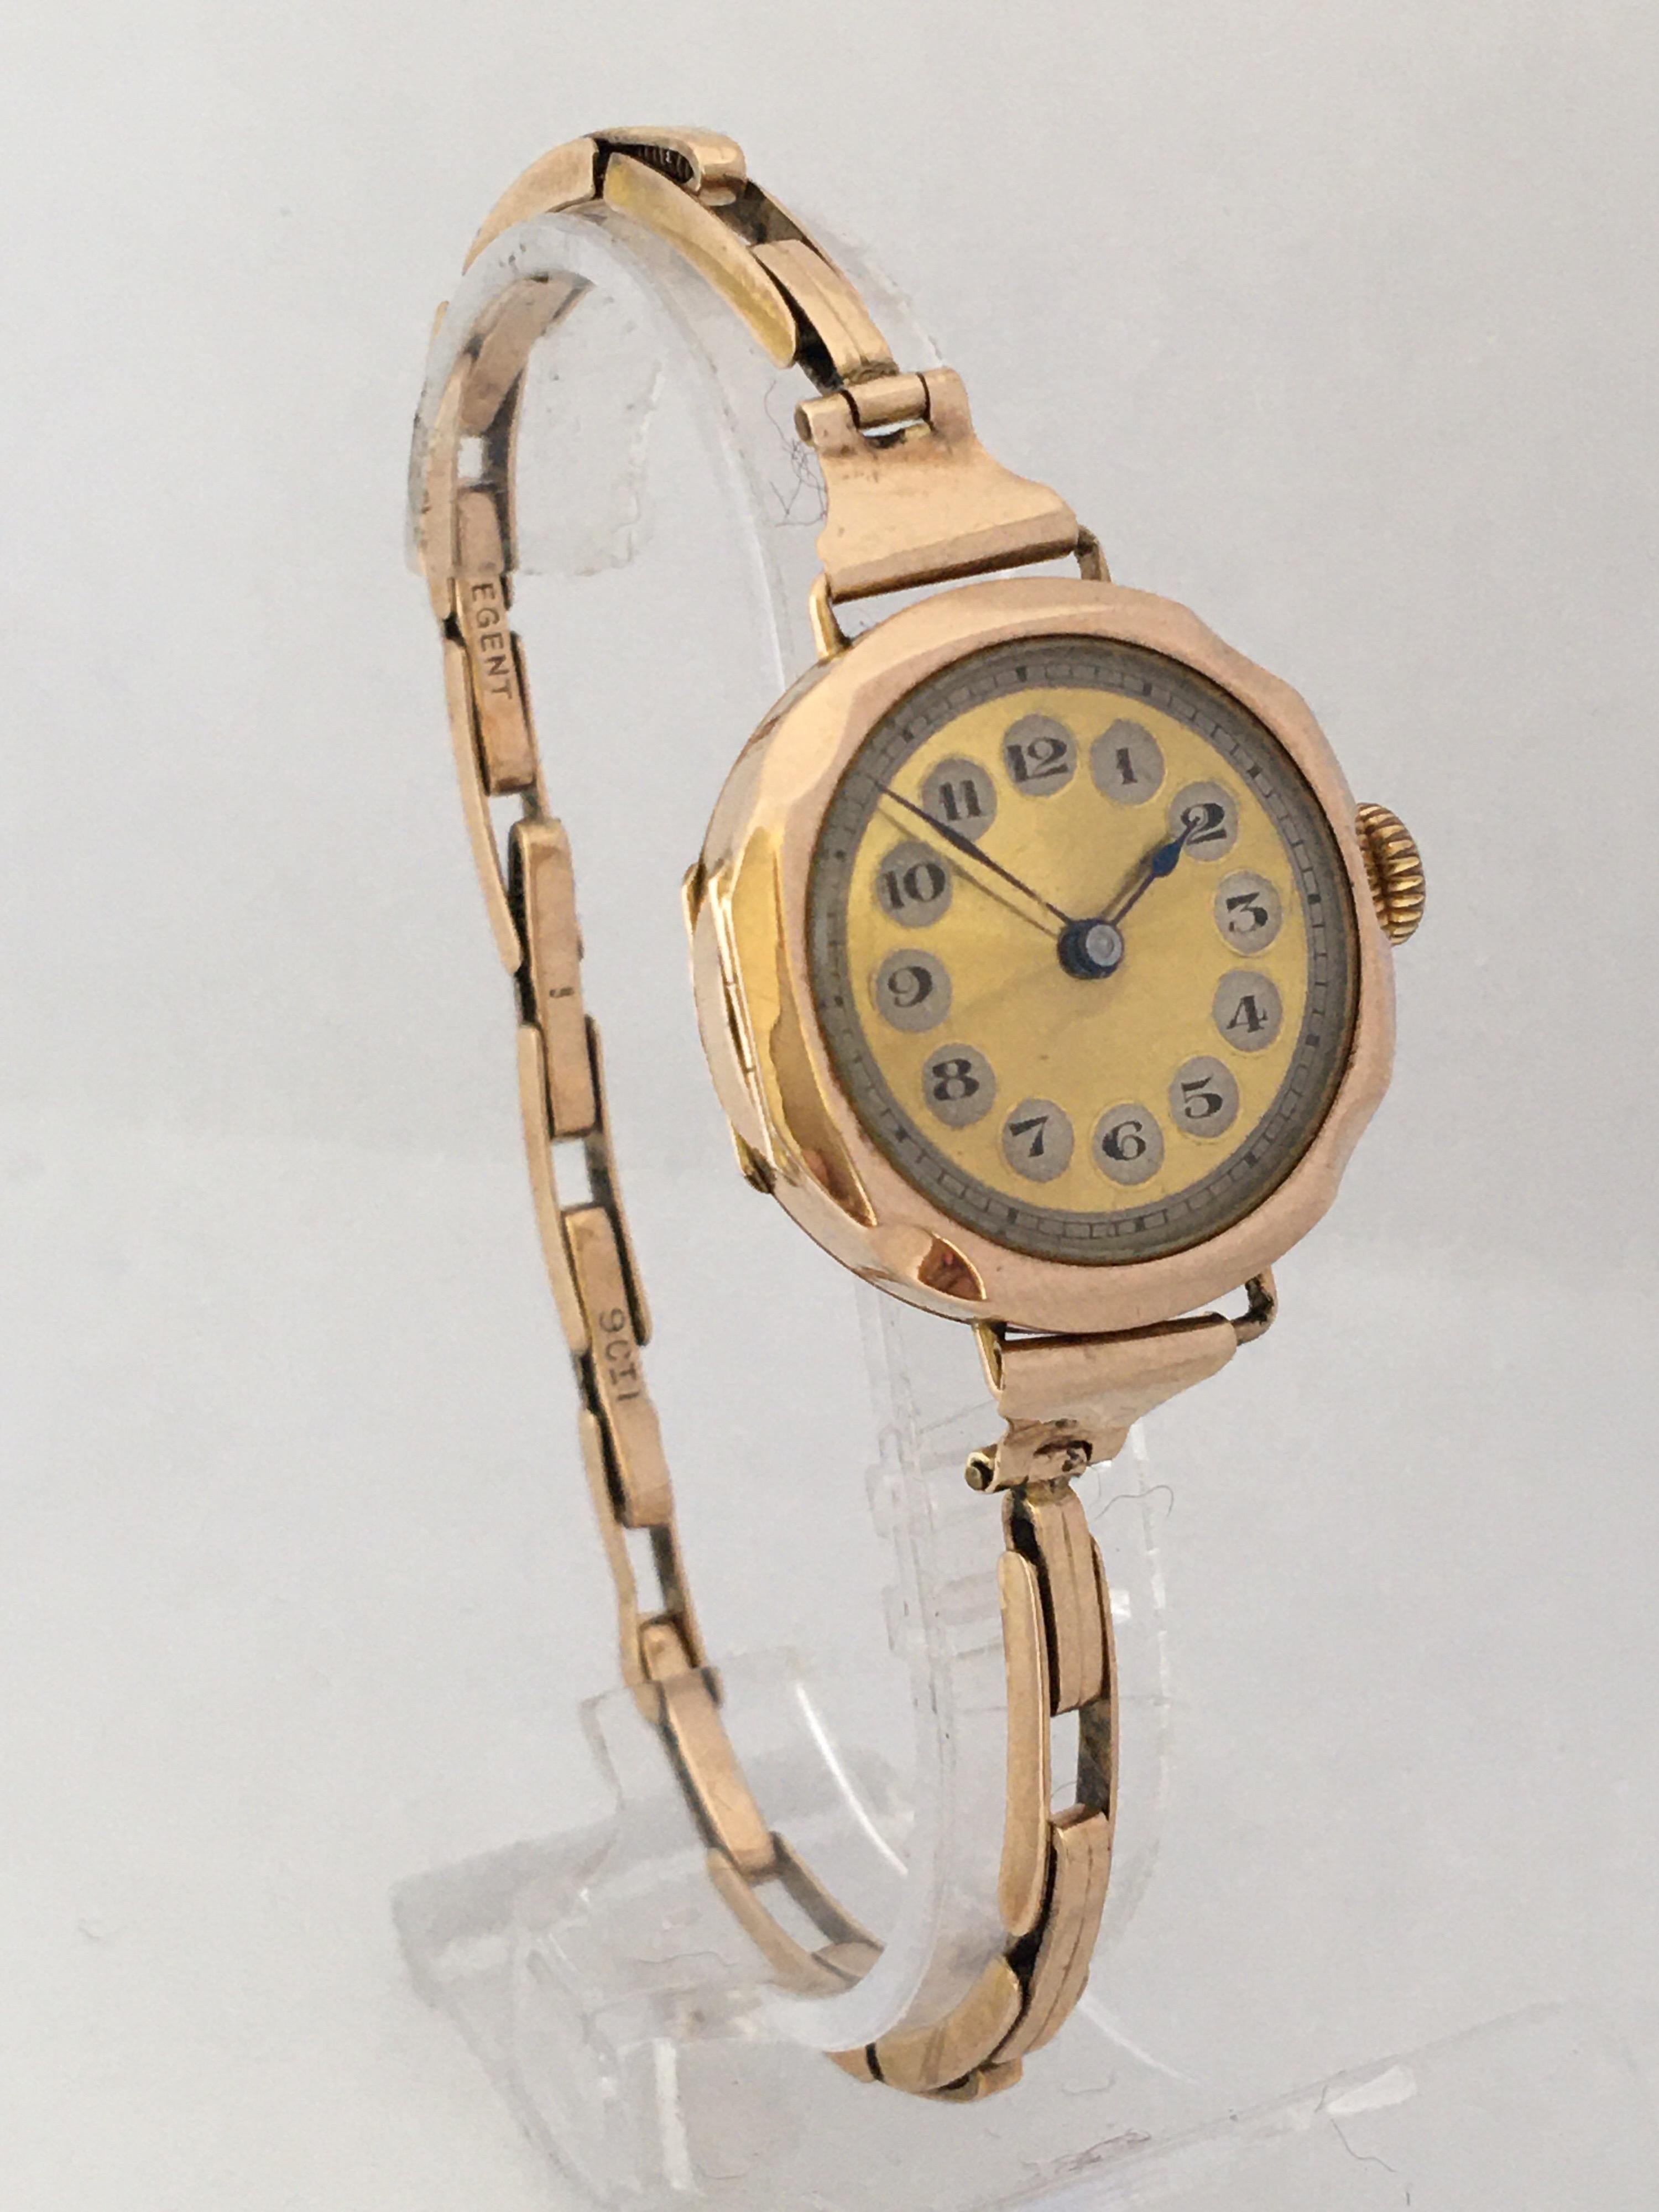 This beautiful and rare antique ladies gold trench watch is working and it is ticking nicely and it runs well. Visible signs of ageing and wear with light and tiny scratches on the glass and on the gold watch case. The hard metal gold plated winder